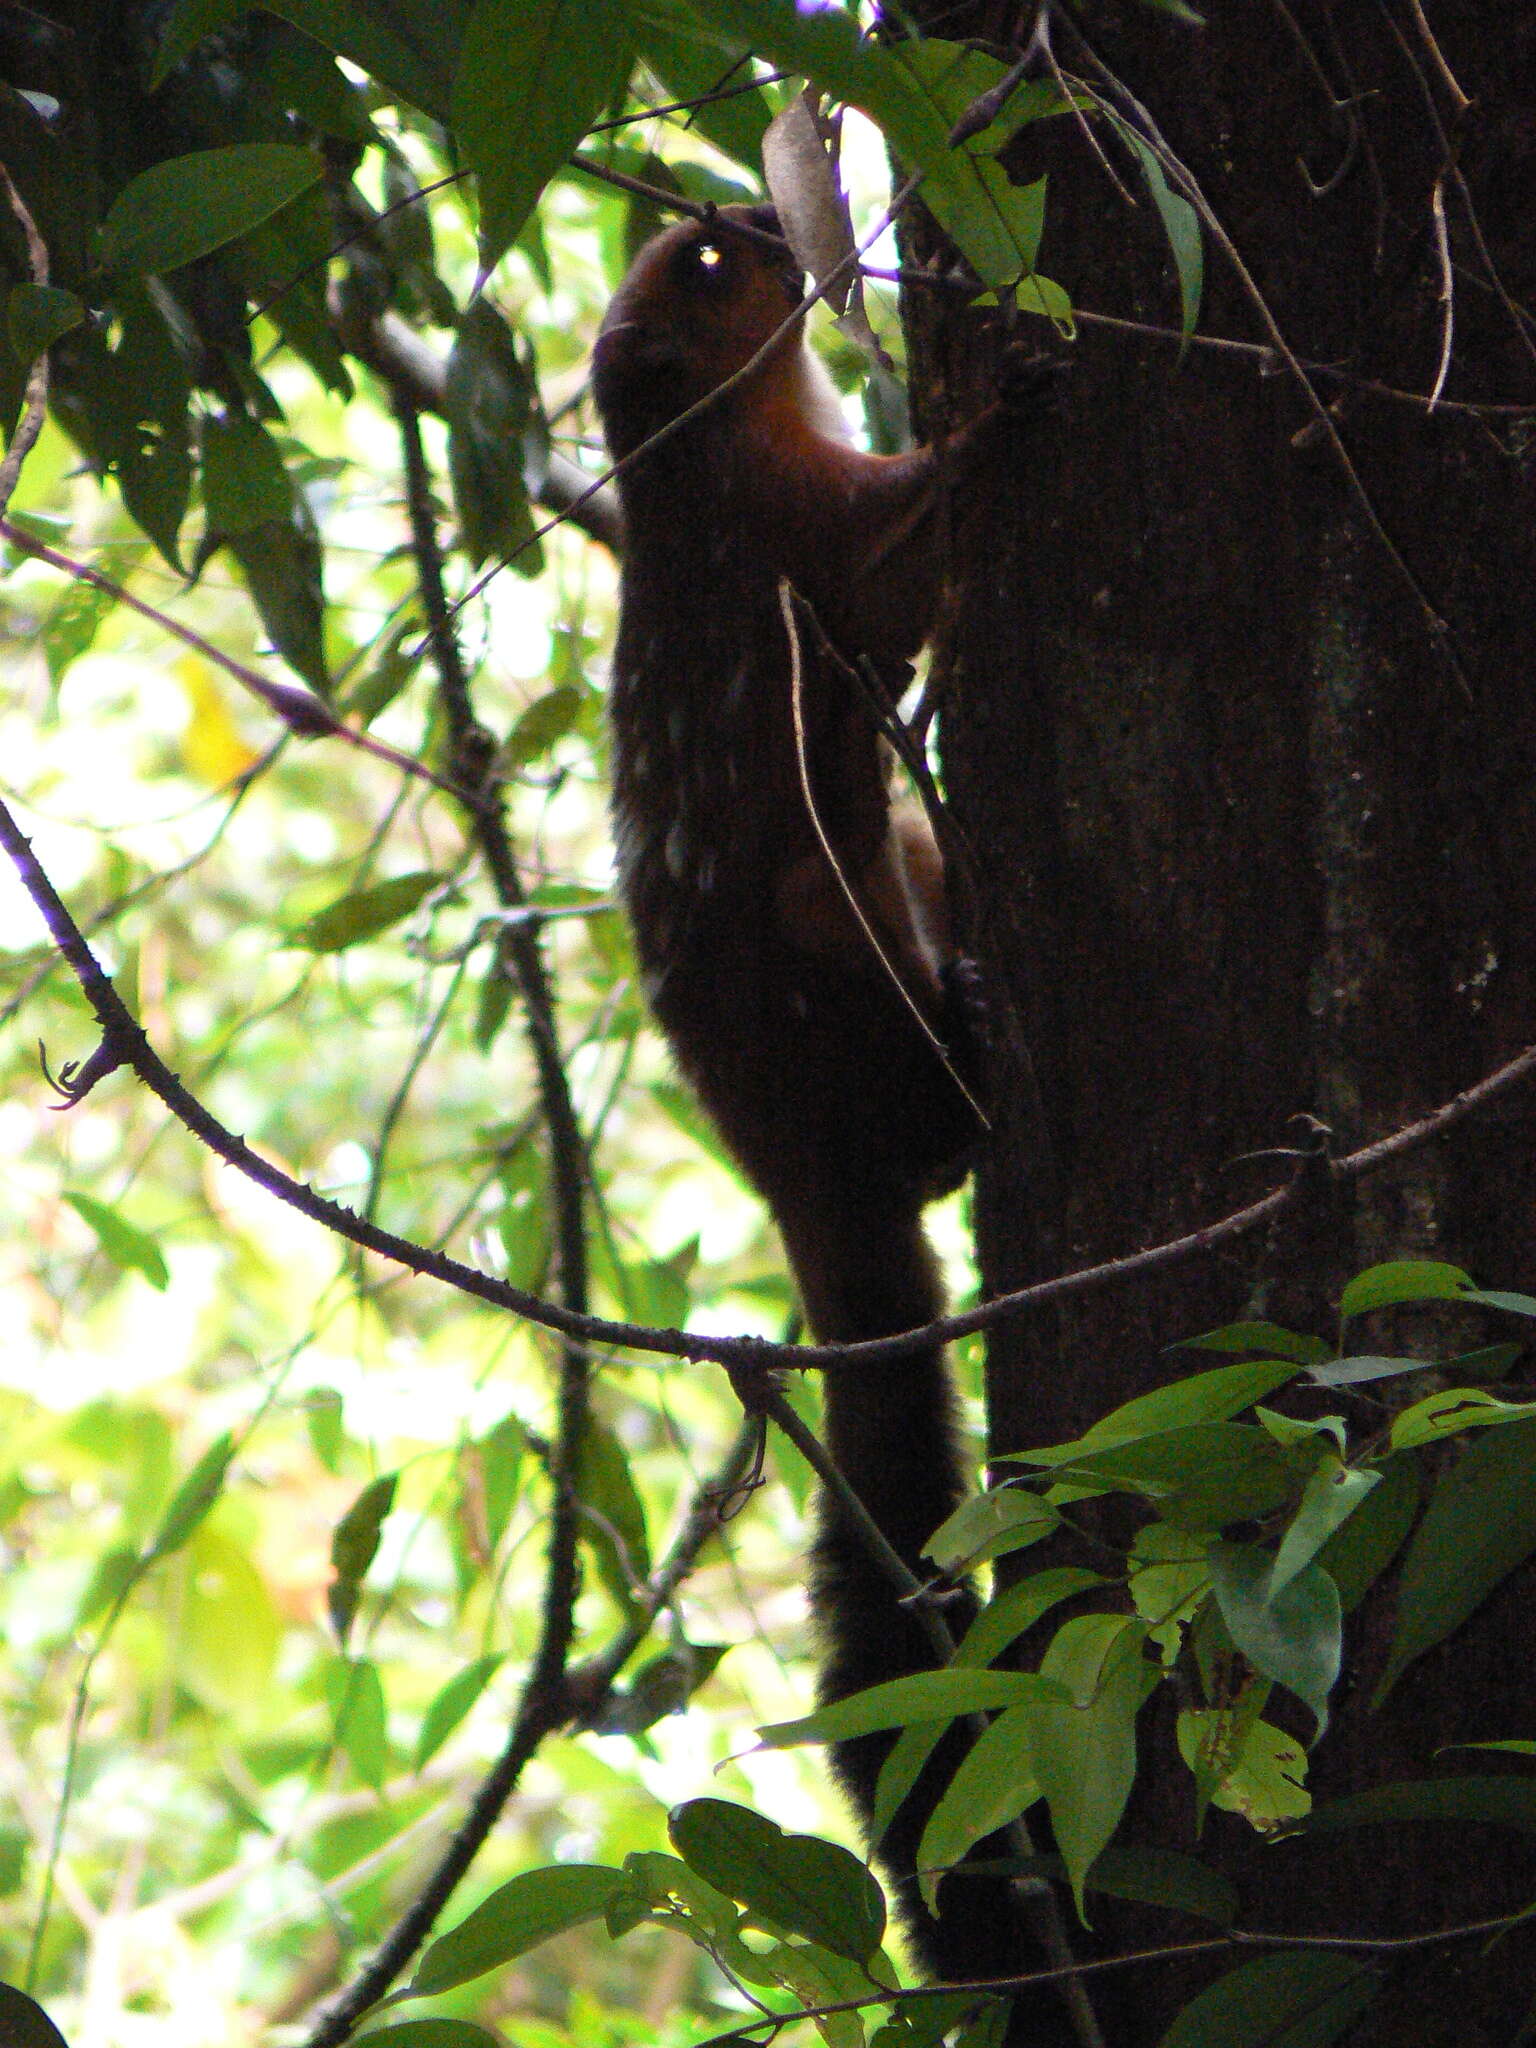 Image of Spotted Giant Flying Squirrel